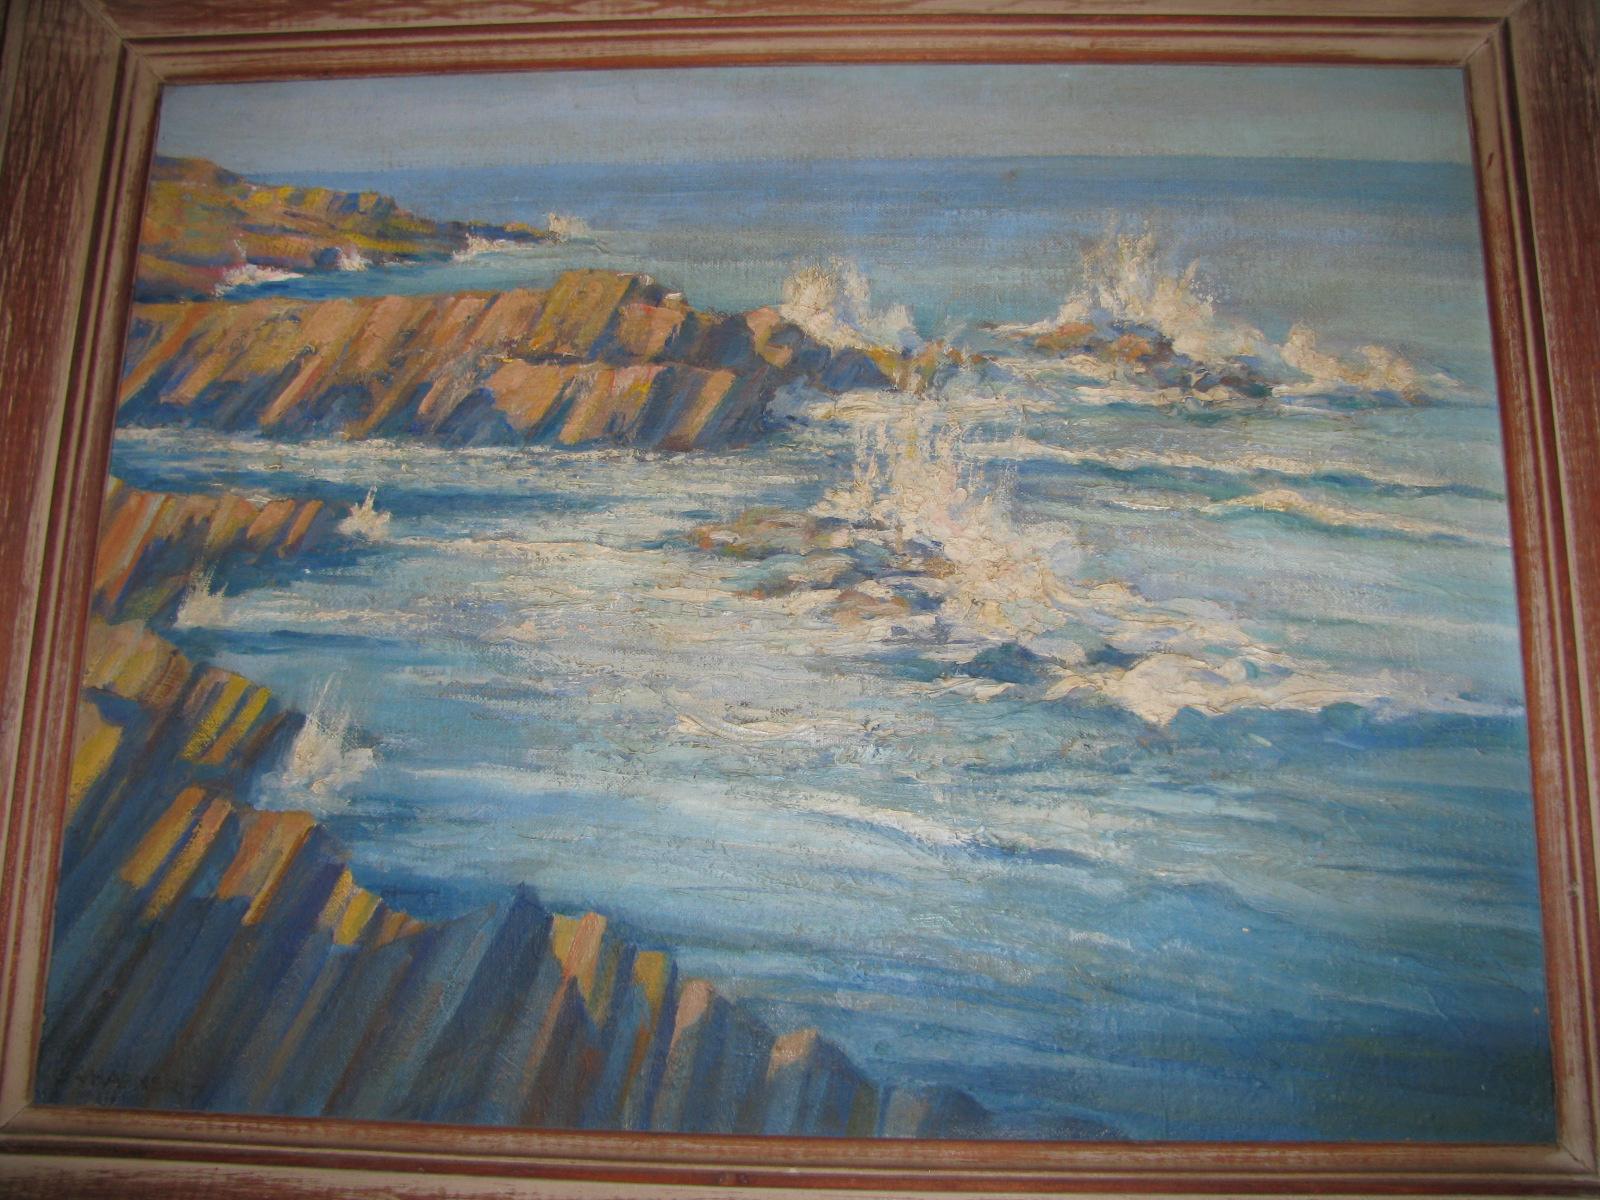 Fabulous painting of Ogunquit Maine by Charles Andrew Hafner titled Late Afternoon. Scene depicts water crashing on the cubist and unique set of rocks on the Ogunquit shore. Painting size is 17.75 x 13.75 in its original frame. Framed size is 23.25